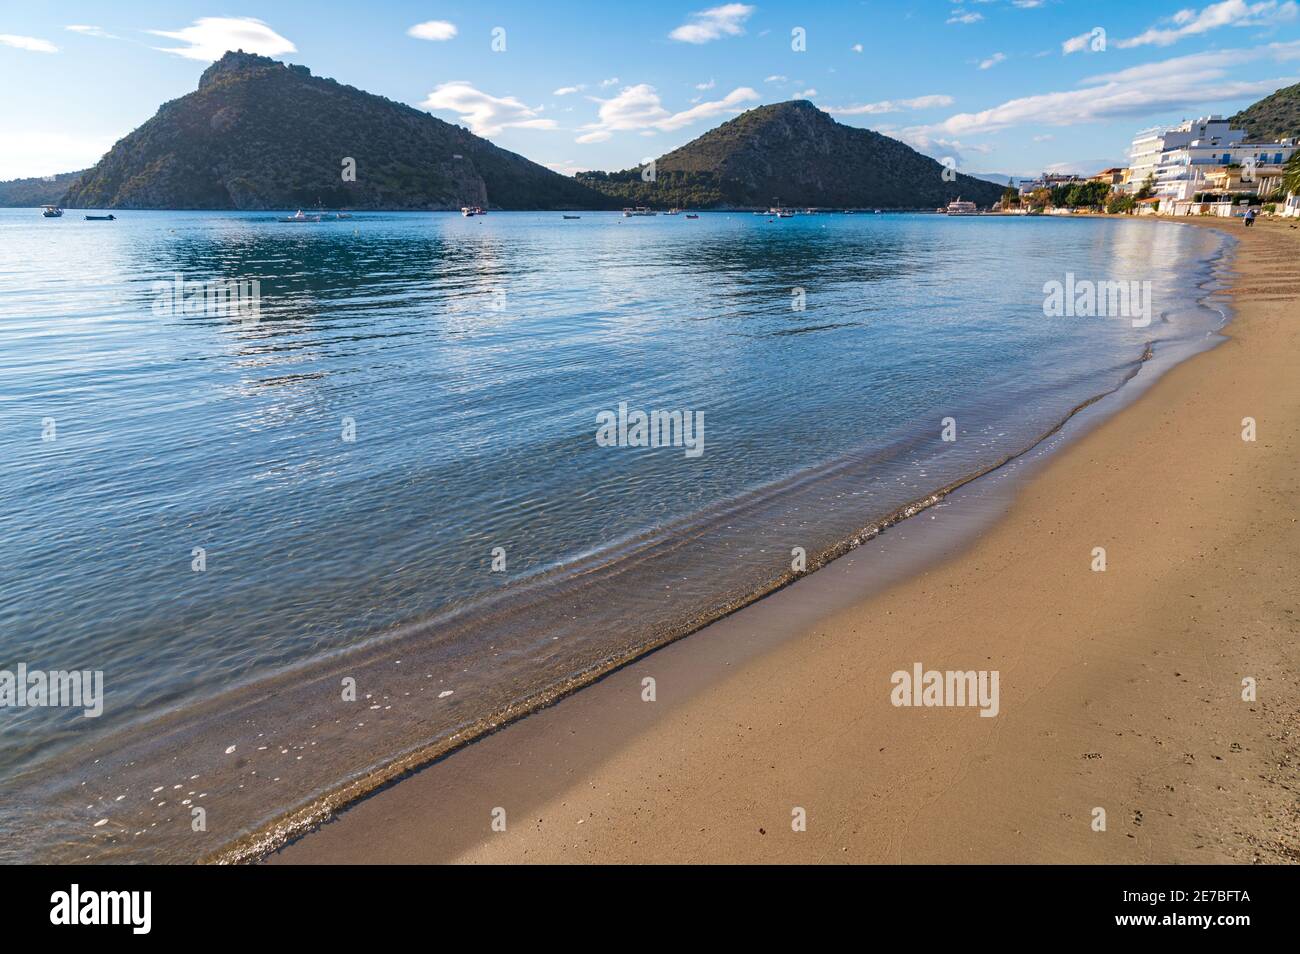 Sand beach at the seaside resort of Tolo, Greece Stock Photo